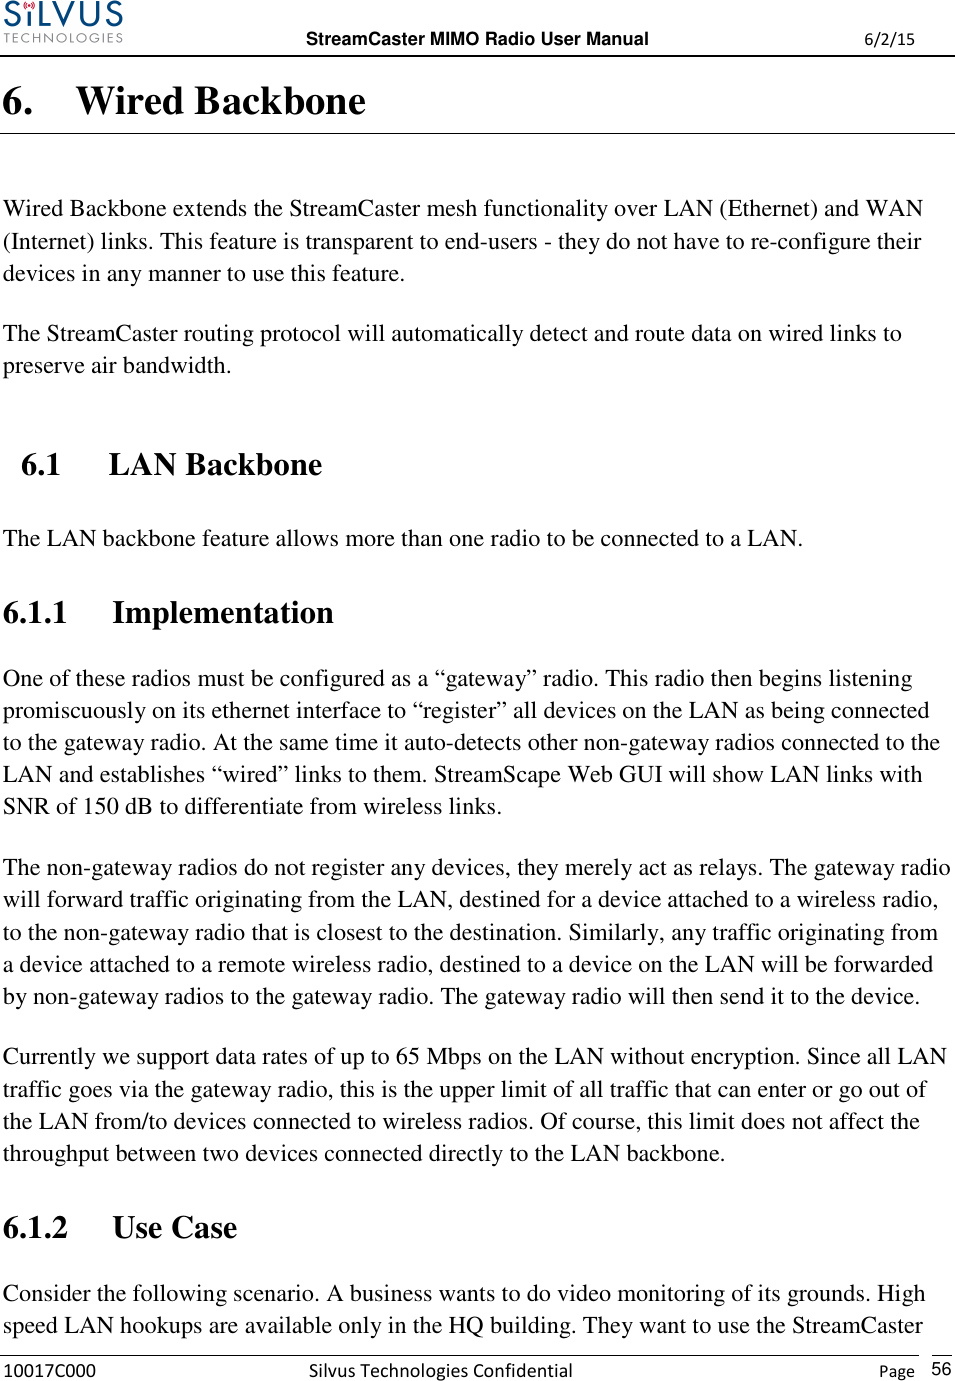  StreamCaster MIMO Radio User Manual  6/2/15 10017C000 Silvus Technologies Confidential    Page   56 6. Wired Backbone Wired Backbone extends the StreamCaster mesh functionality over LAN (Ethernet) and WAN (Internet) links. This feature is transparent to end-users - they do not have to re-configure their devices in any manner to use this feature. The StreamCaster routing protocol will automatically detect and route data on wired links to preserve air bandwidth. 6.1 LAN Backbone The LAN backbone feature allows more than one radio to be connected to a LAN. 6.1.1 Implementation One of these radios must be configured as a “gateway” radio. This radio then begins listening promiscuously on its ethernet interface to “register” all devices on the LAN as being connected to the gateway radio. At the same time it auto-detects other non-gateway radios connected to the LAN and establishes “wired” links to them. StreamScape Web GUI will show LAN links with SNR of 150 dB to differentiate from wireless links. The non-gateway radios do not register any devices, they merely act as relays. The gateway radio will forward traffic originating from the LAN, destined for a device attached to a wireless radio, to the non-gateway radio that is closest to the destination. Similarly, any traffic originating from a device attached to a remote wireless radio, destined to a device on the LAN will be forwarded by non-gateway radios to the gateway radio. The gateway radio will then send it to the device. Currently we support data rates of up to 65 Mbps on the LAN without encryption. Since all LAN traffic goes via the gateway radio, this is the upper limit of all traffic that can enter or go out of the LAN from/to devices connected to wireless radios. Of course, this limit does not affect the throughput between two devices connected directly to the LAN backbone. 6.1.2 Use Case Consider the following scenario. A business wants to do video monitoring of its grounds. High speed LAN hookups are available only in the HQ building. They want to use the StreamCaster 